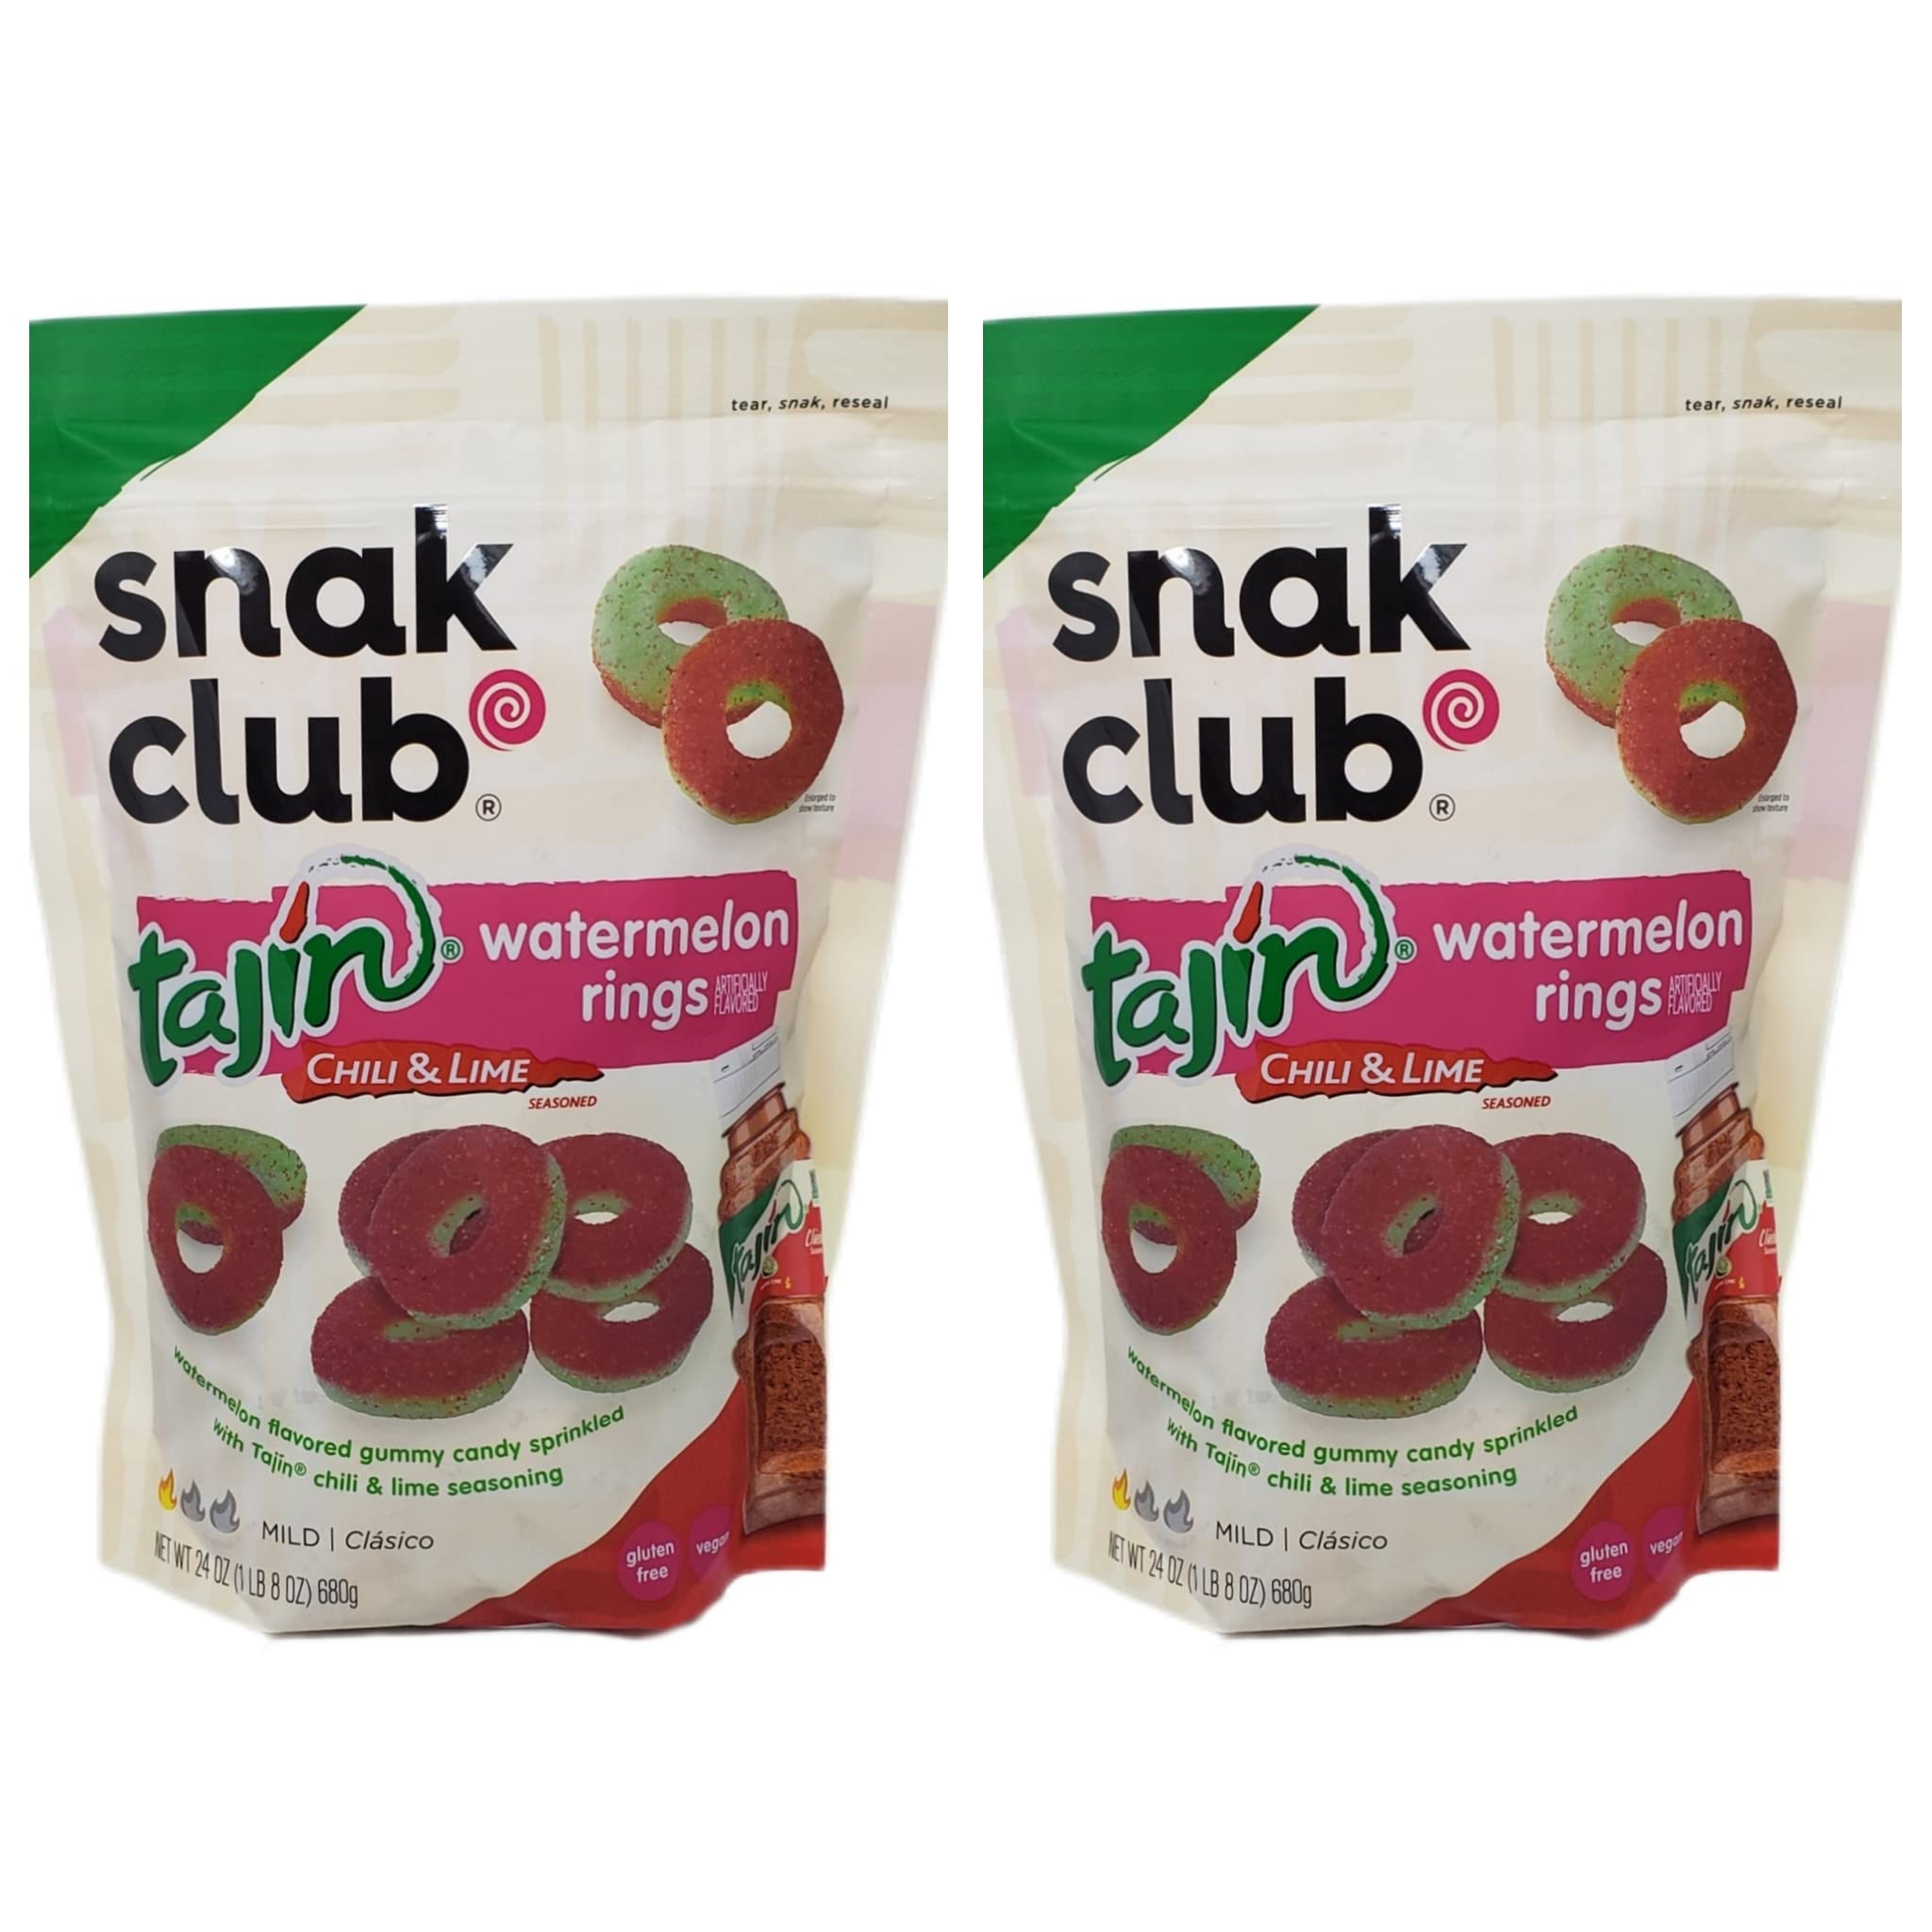 Mua Snak Club Tajin Clasico Chili and Lime Gummy Watermelon Rings - 24 oz  Per Bag - Choose a 2 Pack or 3 Pack - Comes in Resealable Bags - Gluten Free